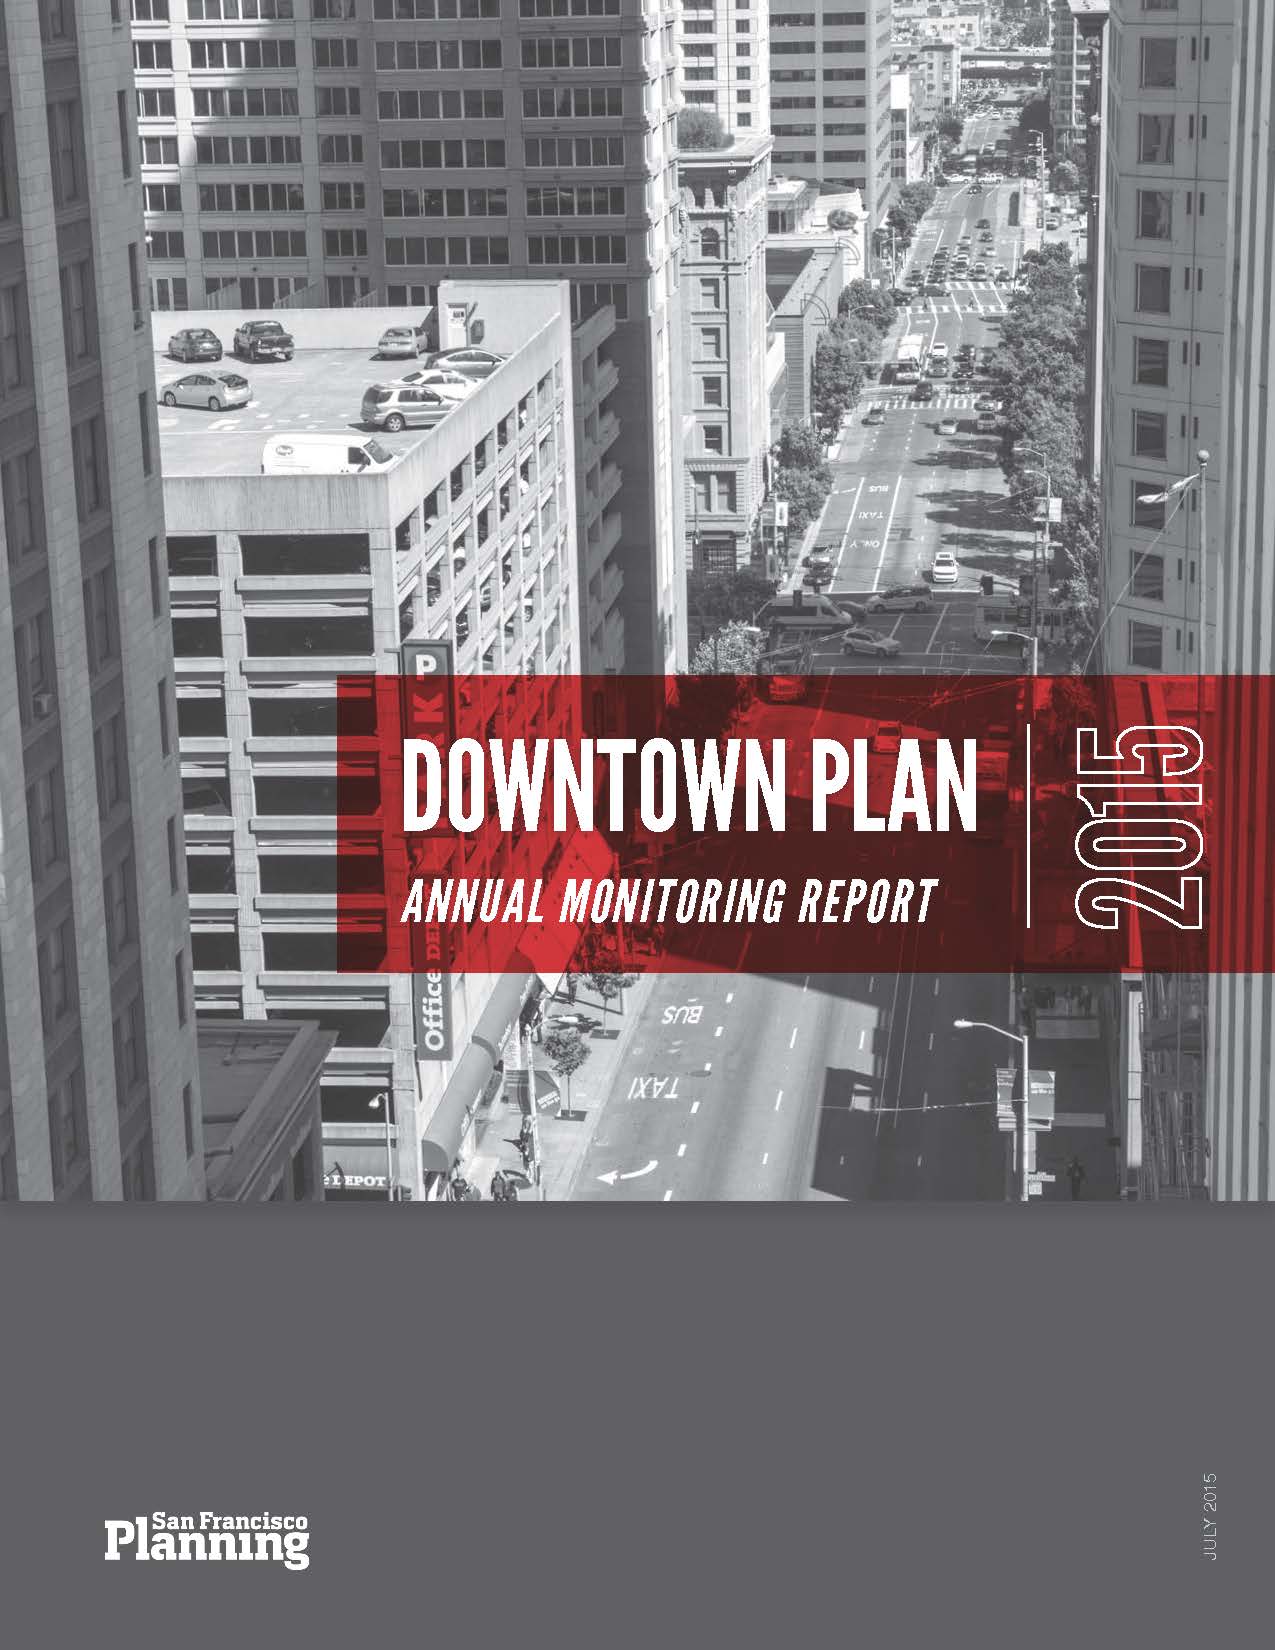 Cover Image for the Downtown Plan Monitoring Report 2015